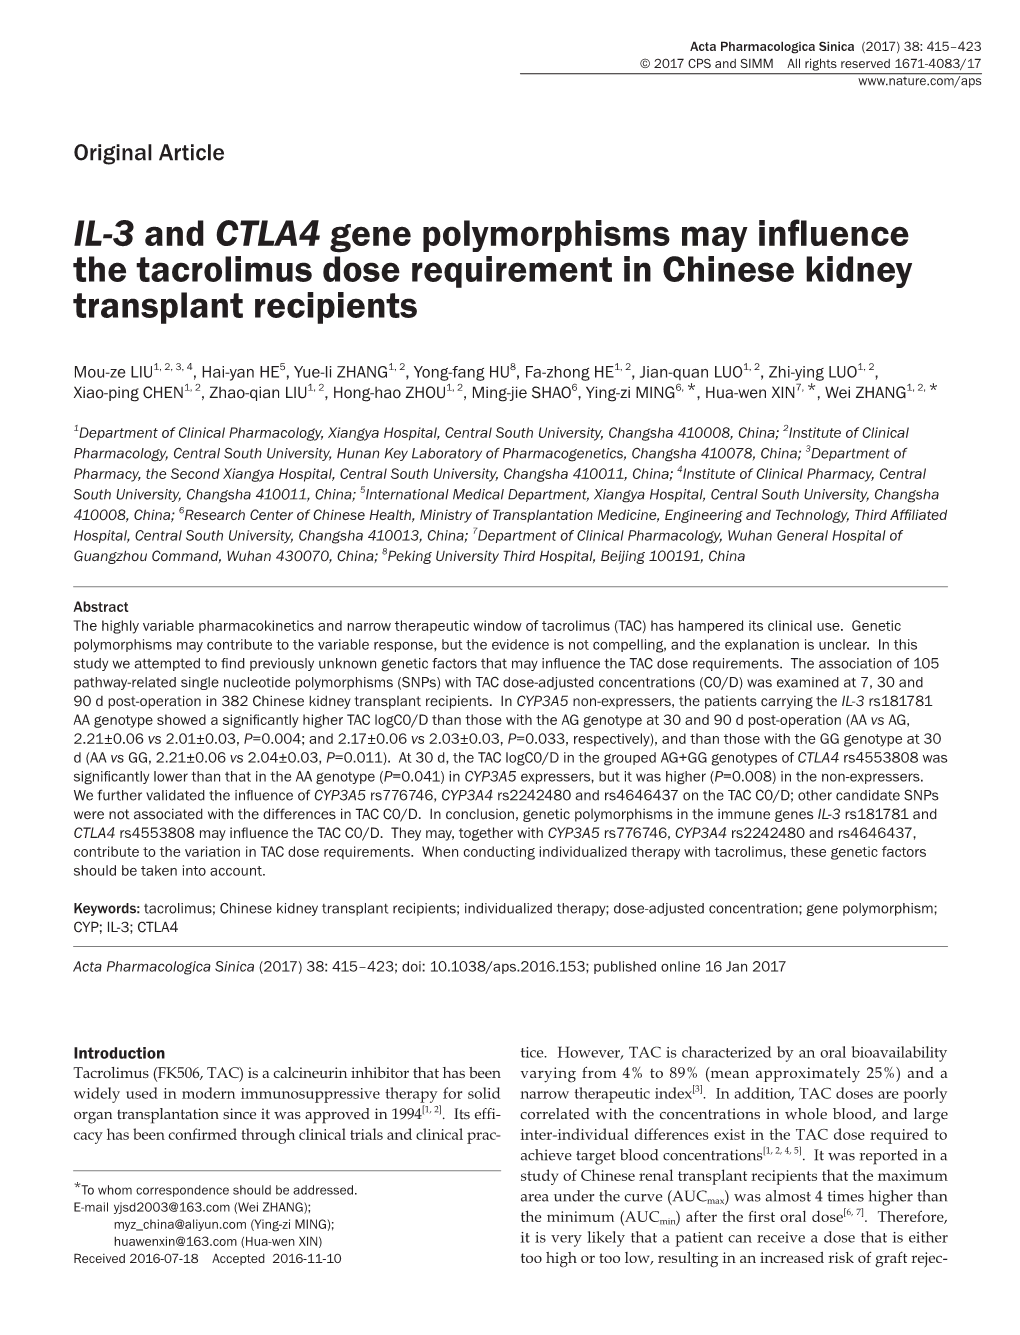 IL-3 and CTLA4 Gene Polymorphisms May Influence the Tacrolimus Dose Requirement in Chinese Kidney Transplant Recipients